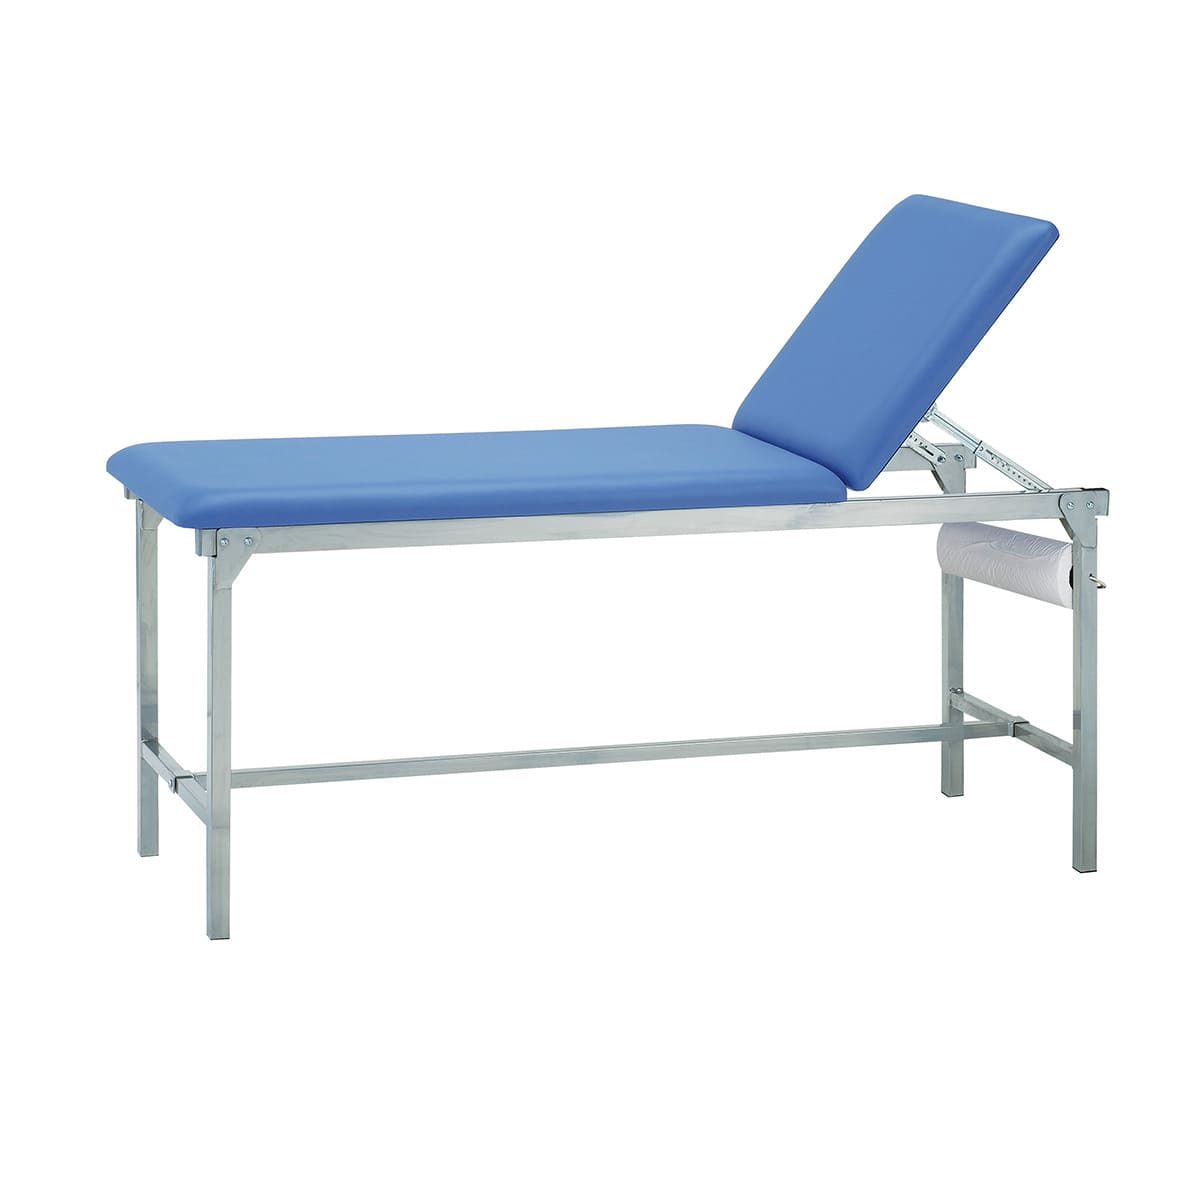 Examination couch width 70cm, height 80cm